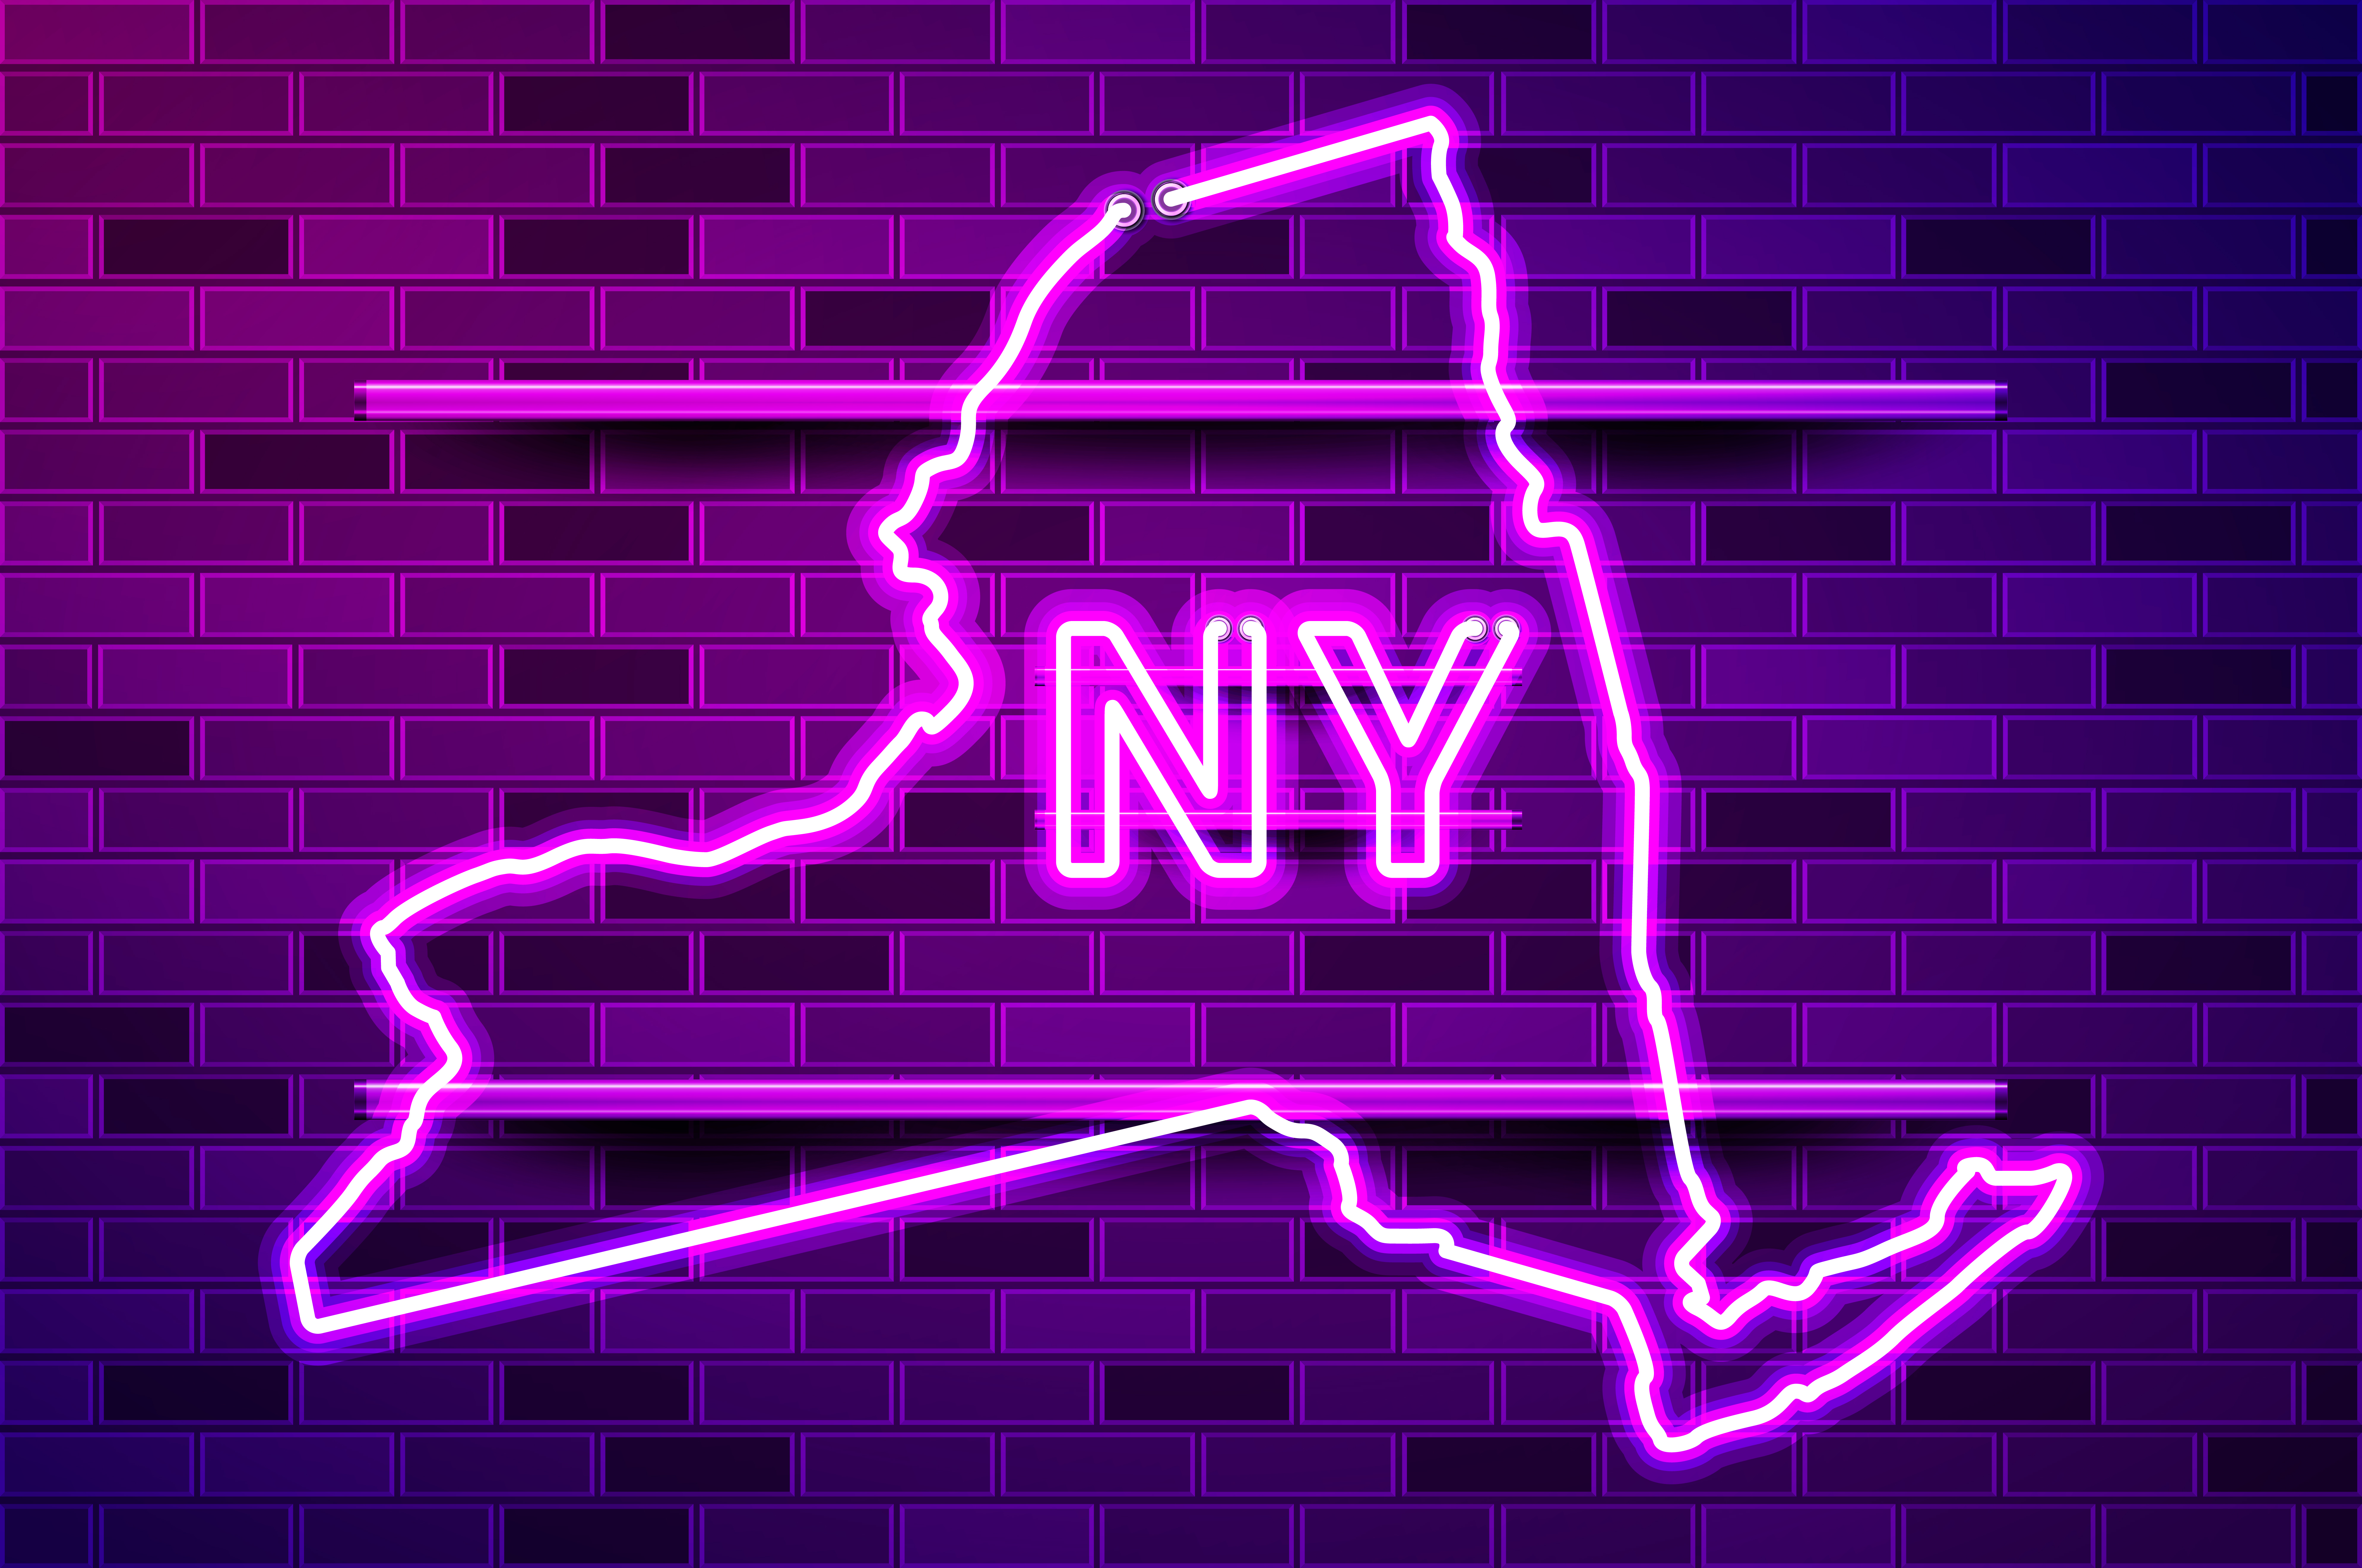 New York US state glowing neon lamp sign. Realistic vector illustration. Purple brick wall, violet glow, metal holders.. New York US state glowing purple neon lamp sign